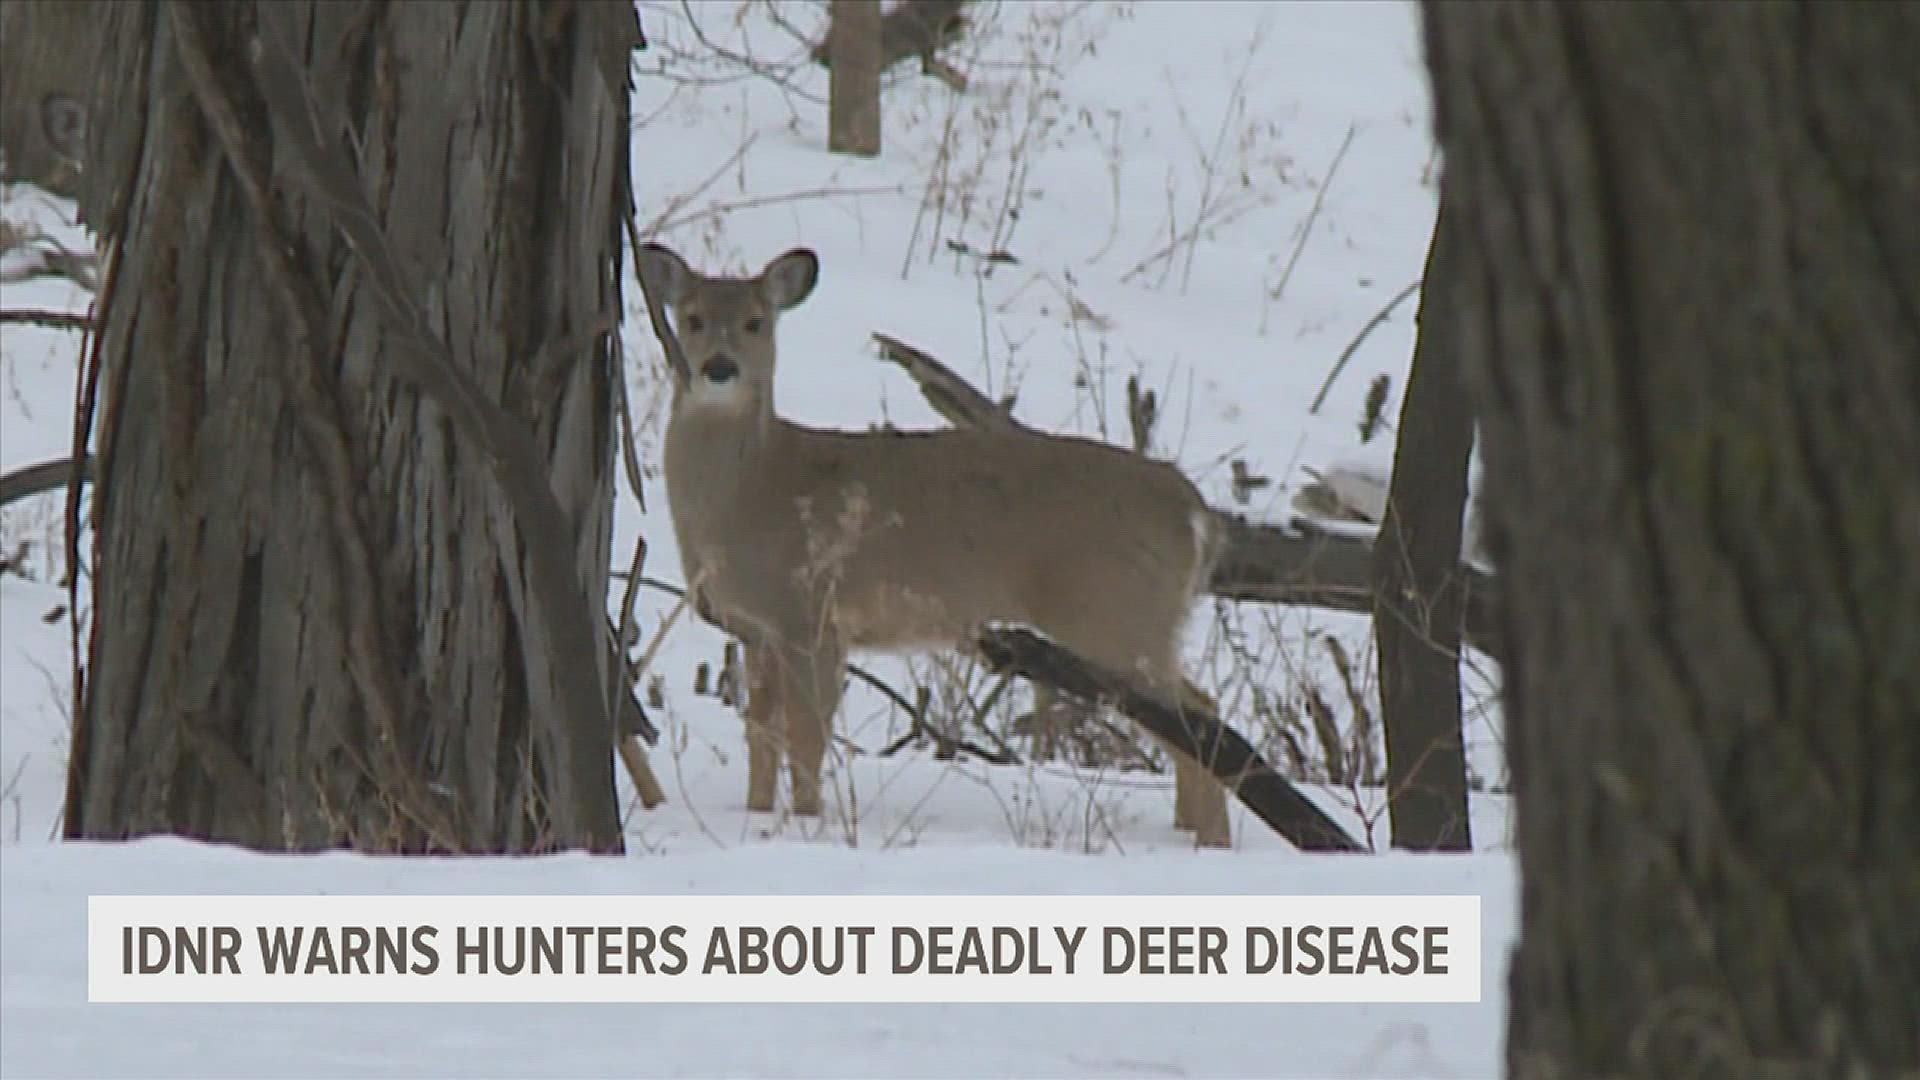 Since 2002, 150,000 deer have been tested for chronic waste disease and over 1,300 have tested positive.